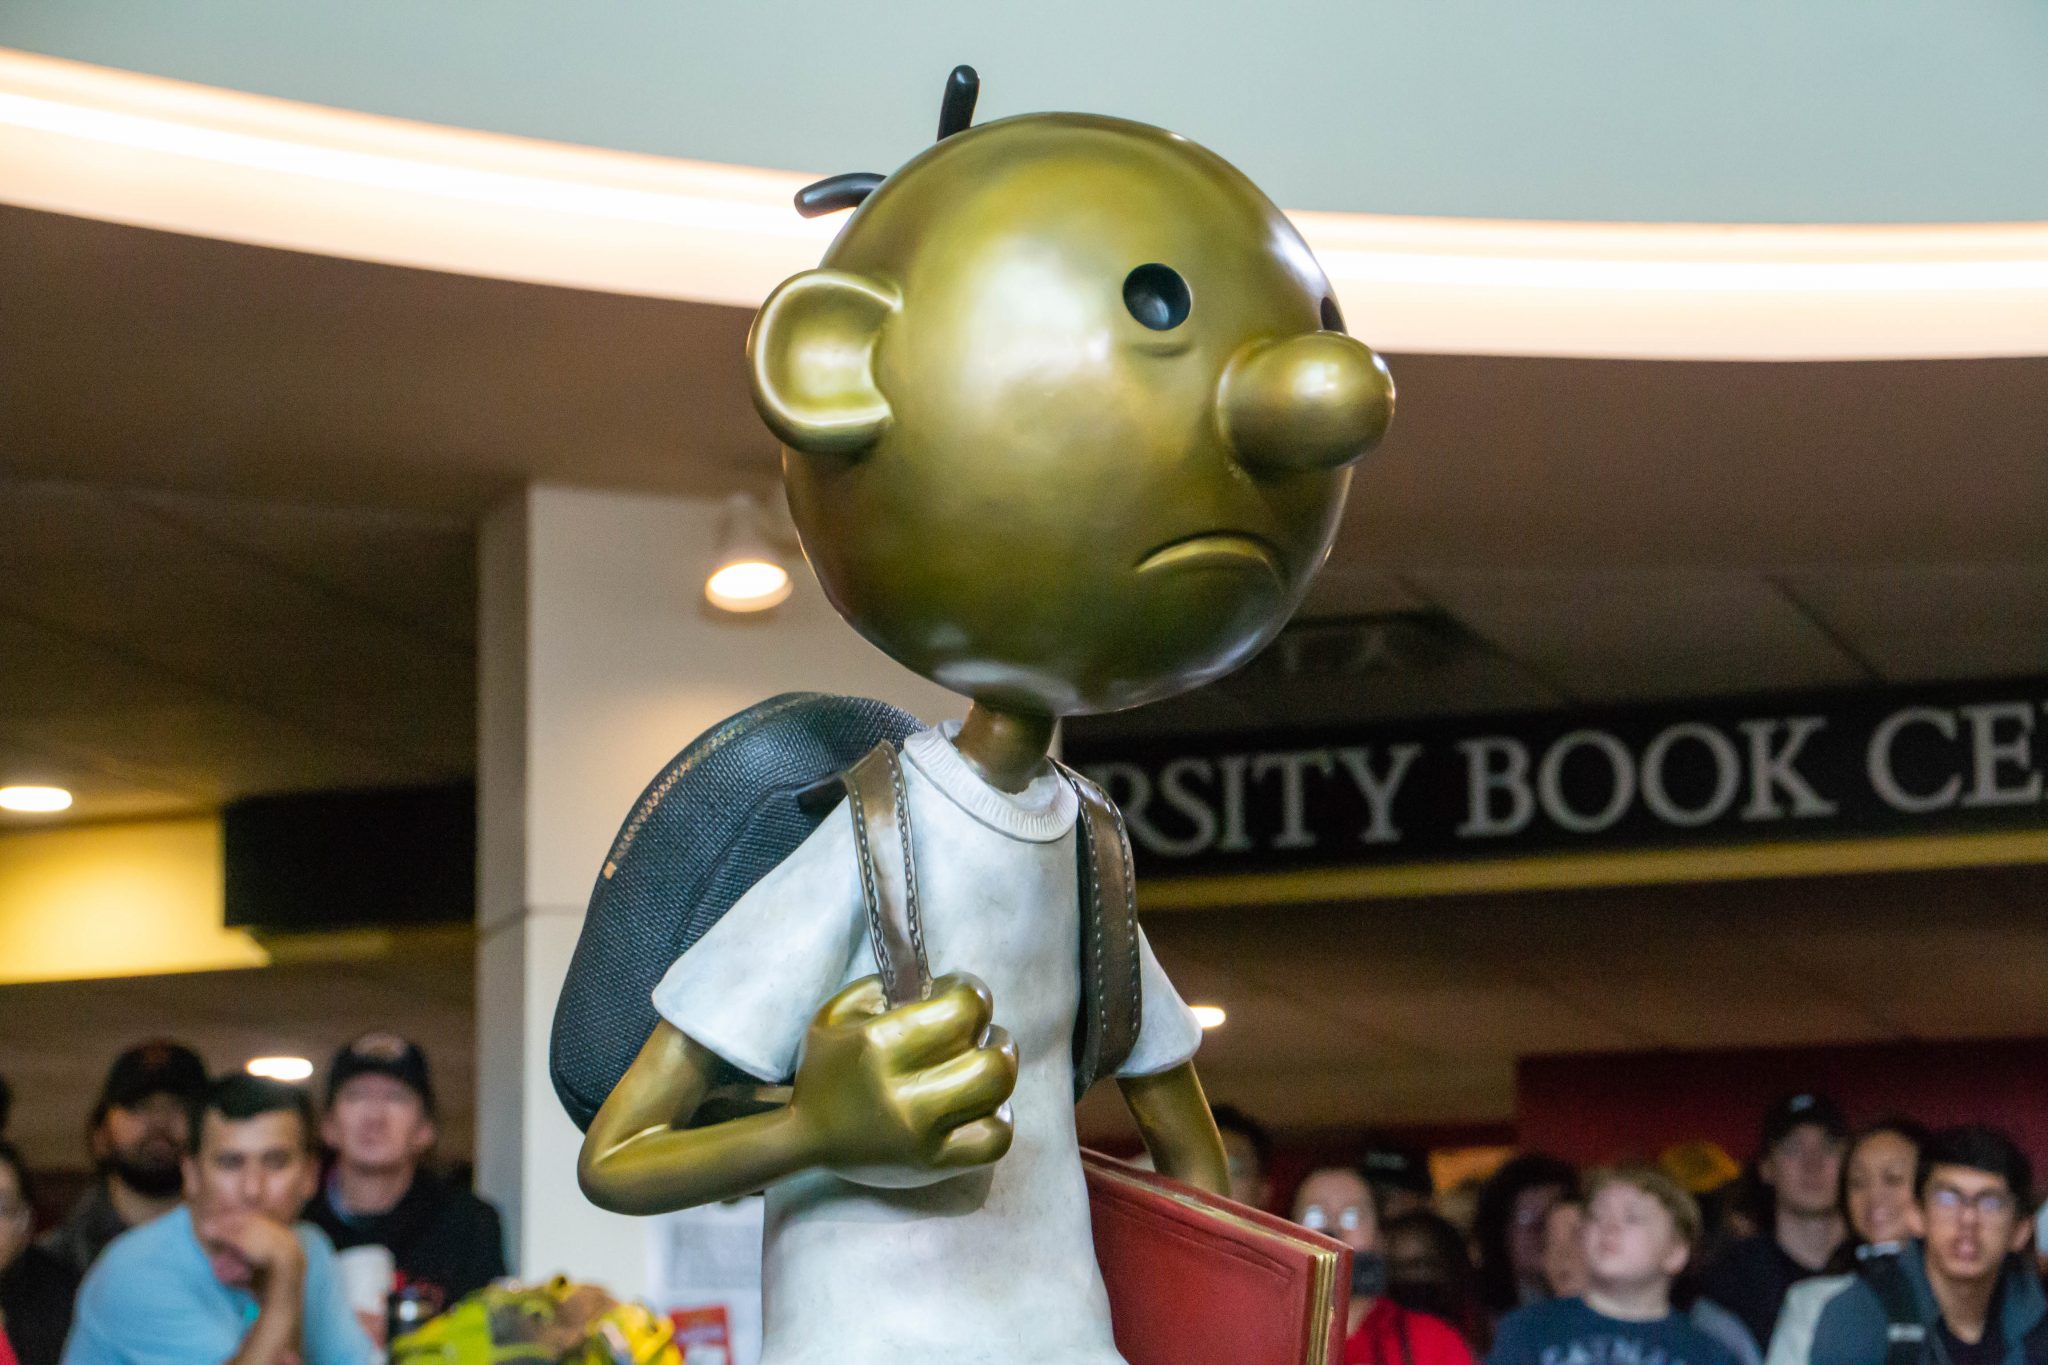 UMD should use the Greg Heffley statue as a book drive to spark a culture  of giving